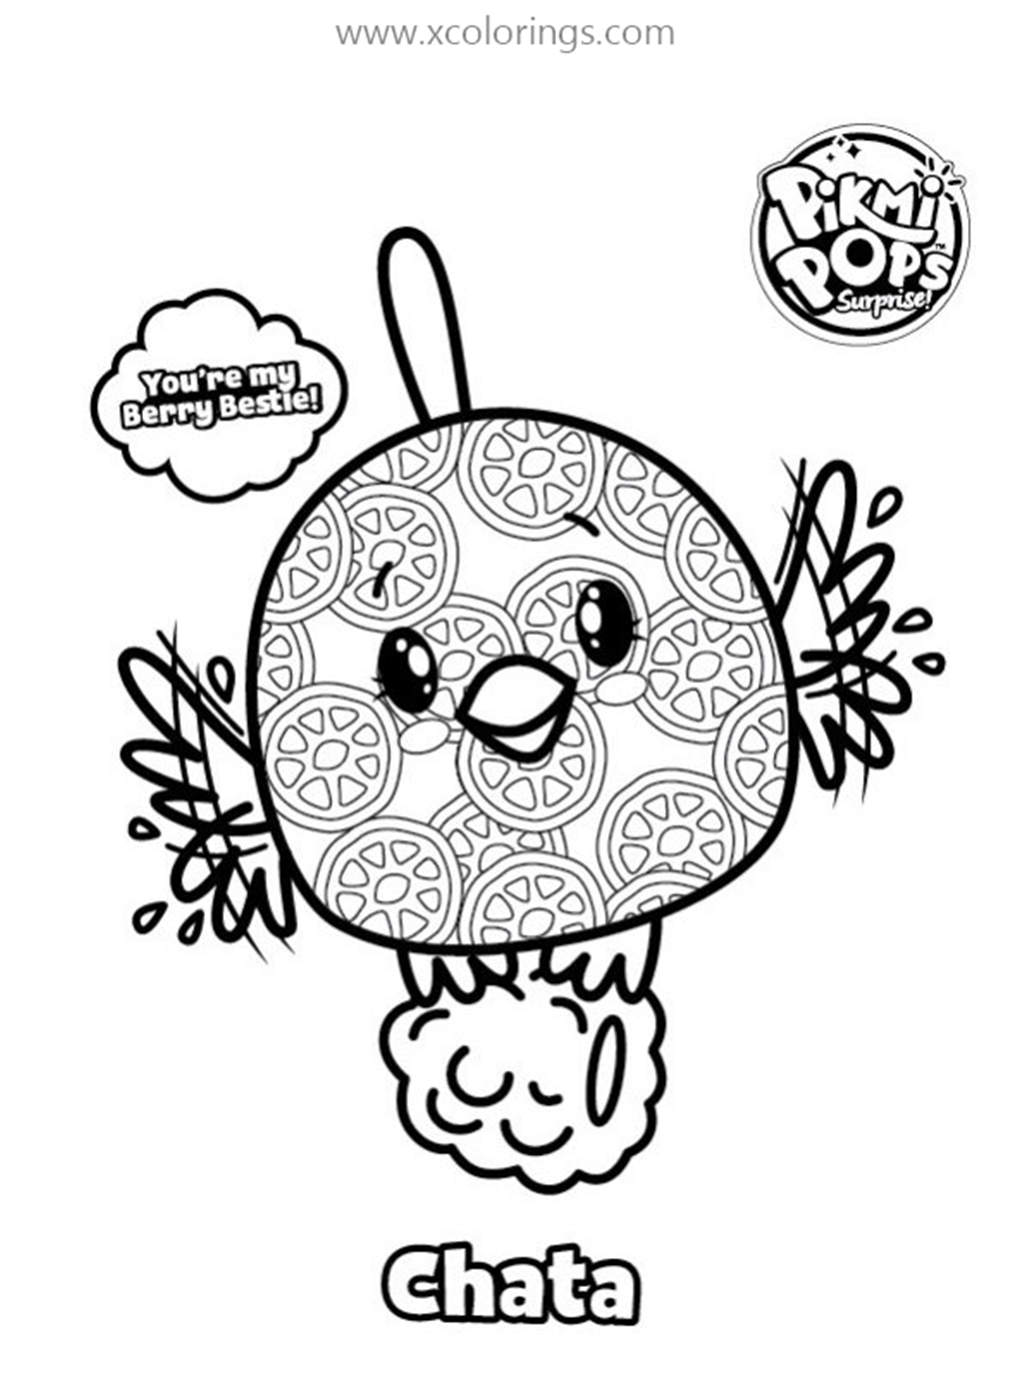 Free Pikmi Pops Chata Coloring Pages printable